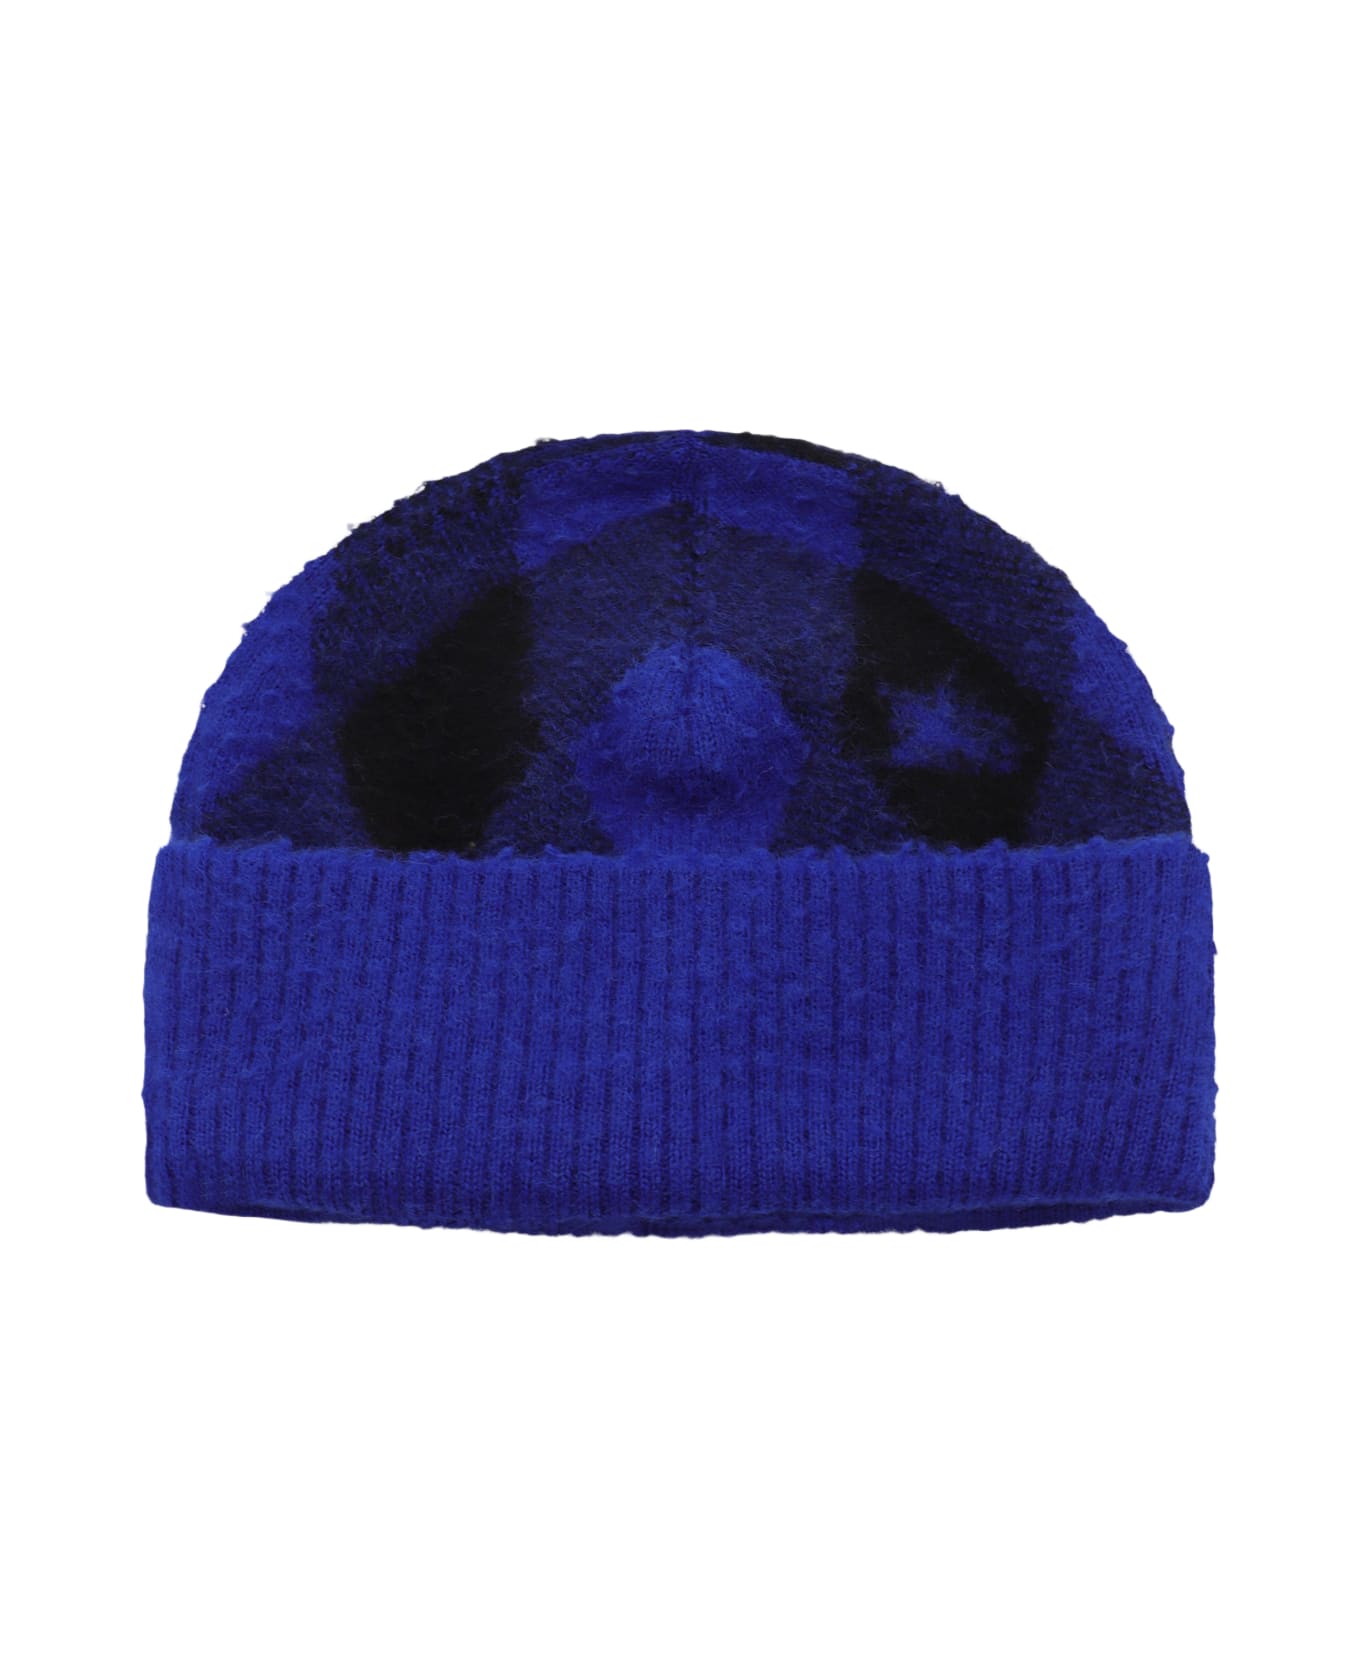 Burberry Blue And Black Wool Hat - Knight/black